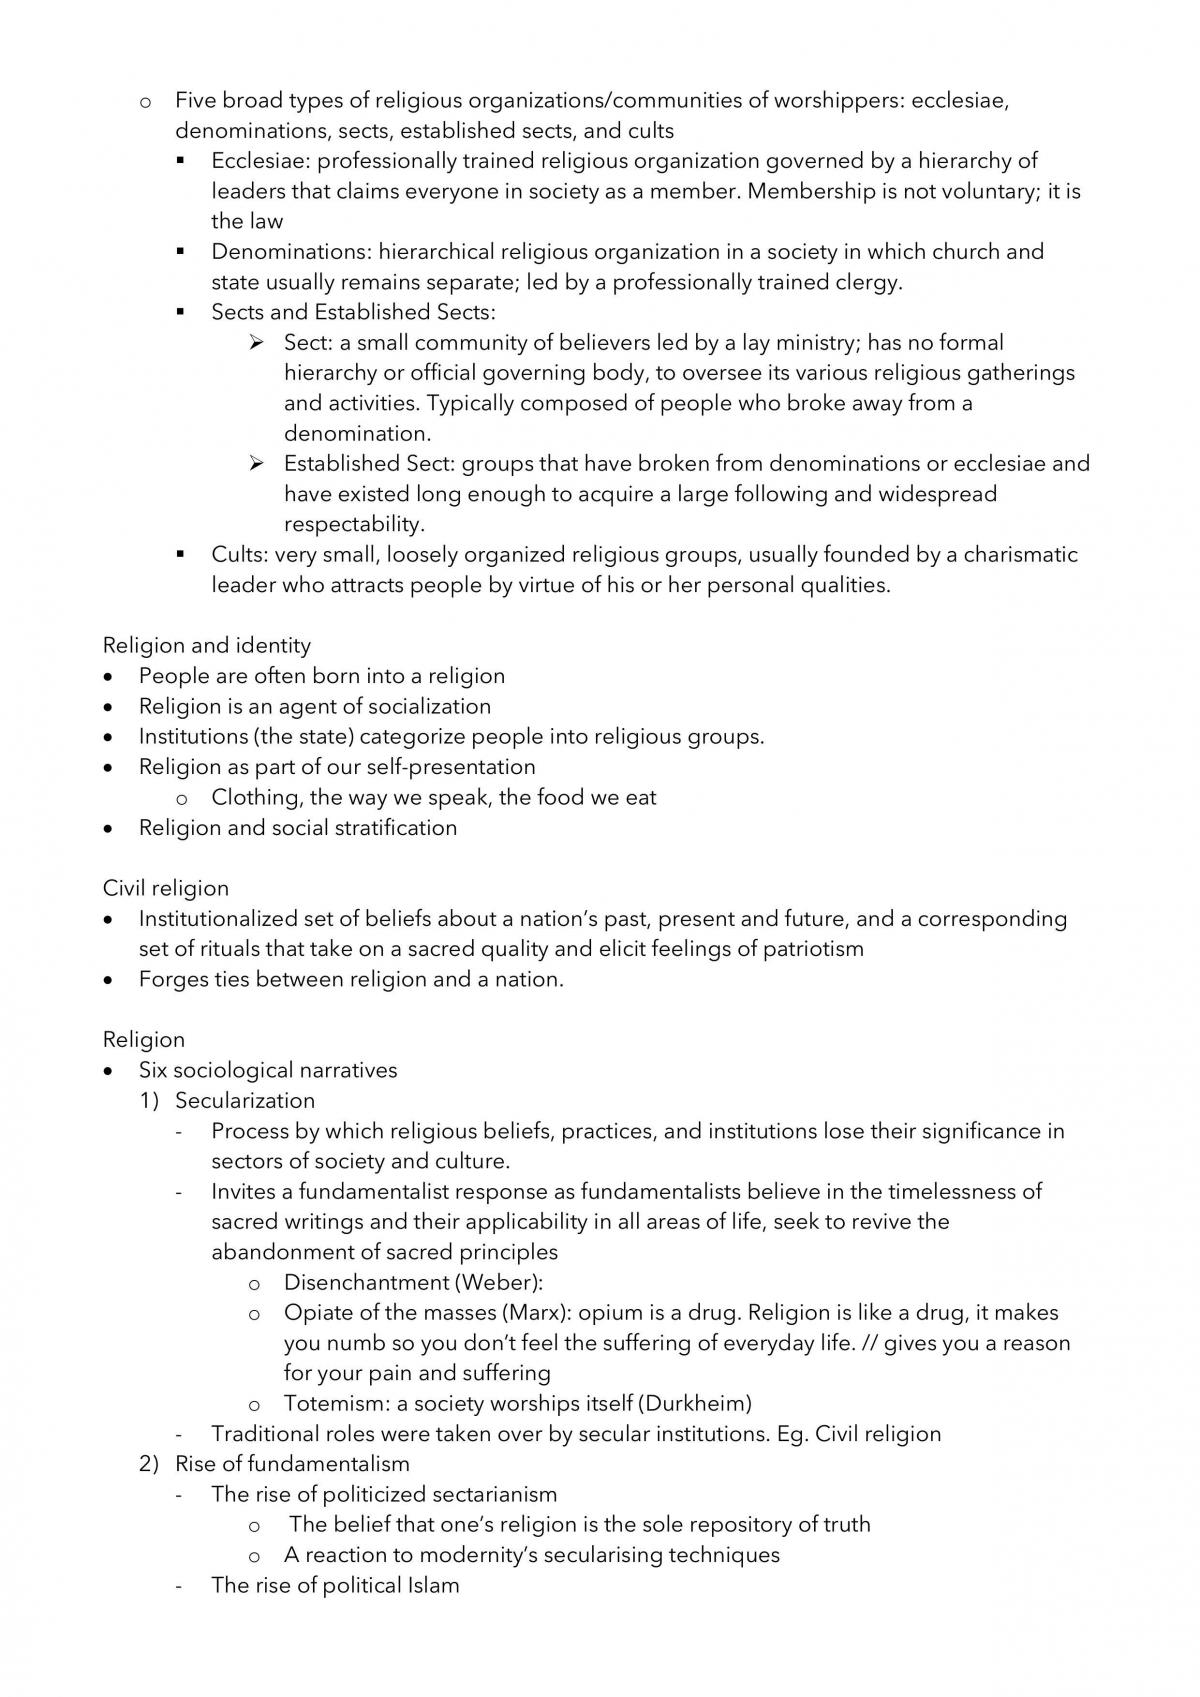 SC1101E A Study of Society Complete Study Notes - Page 29